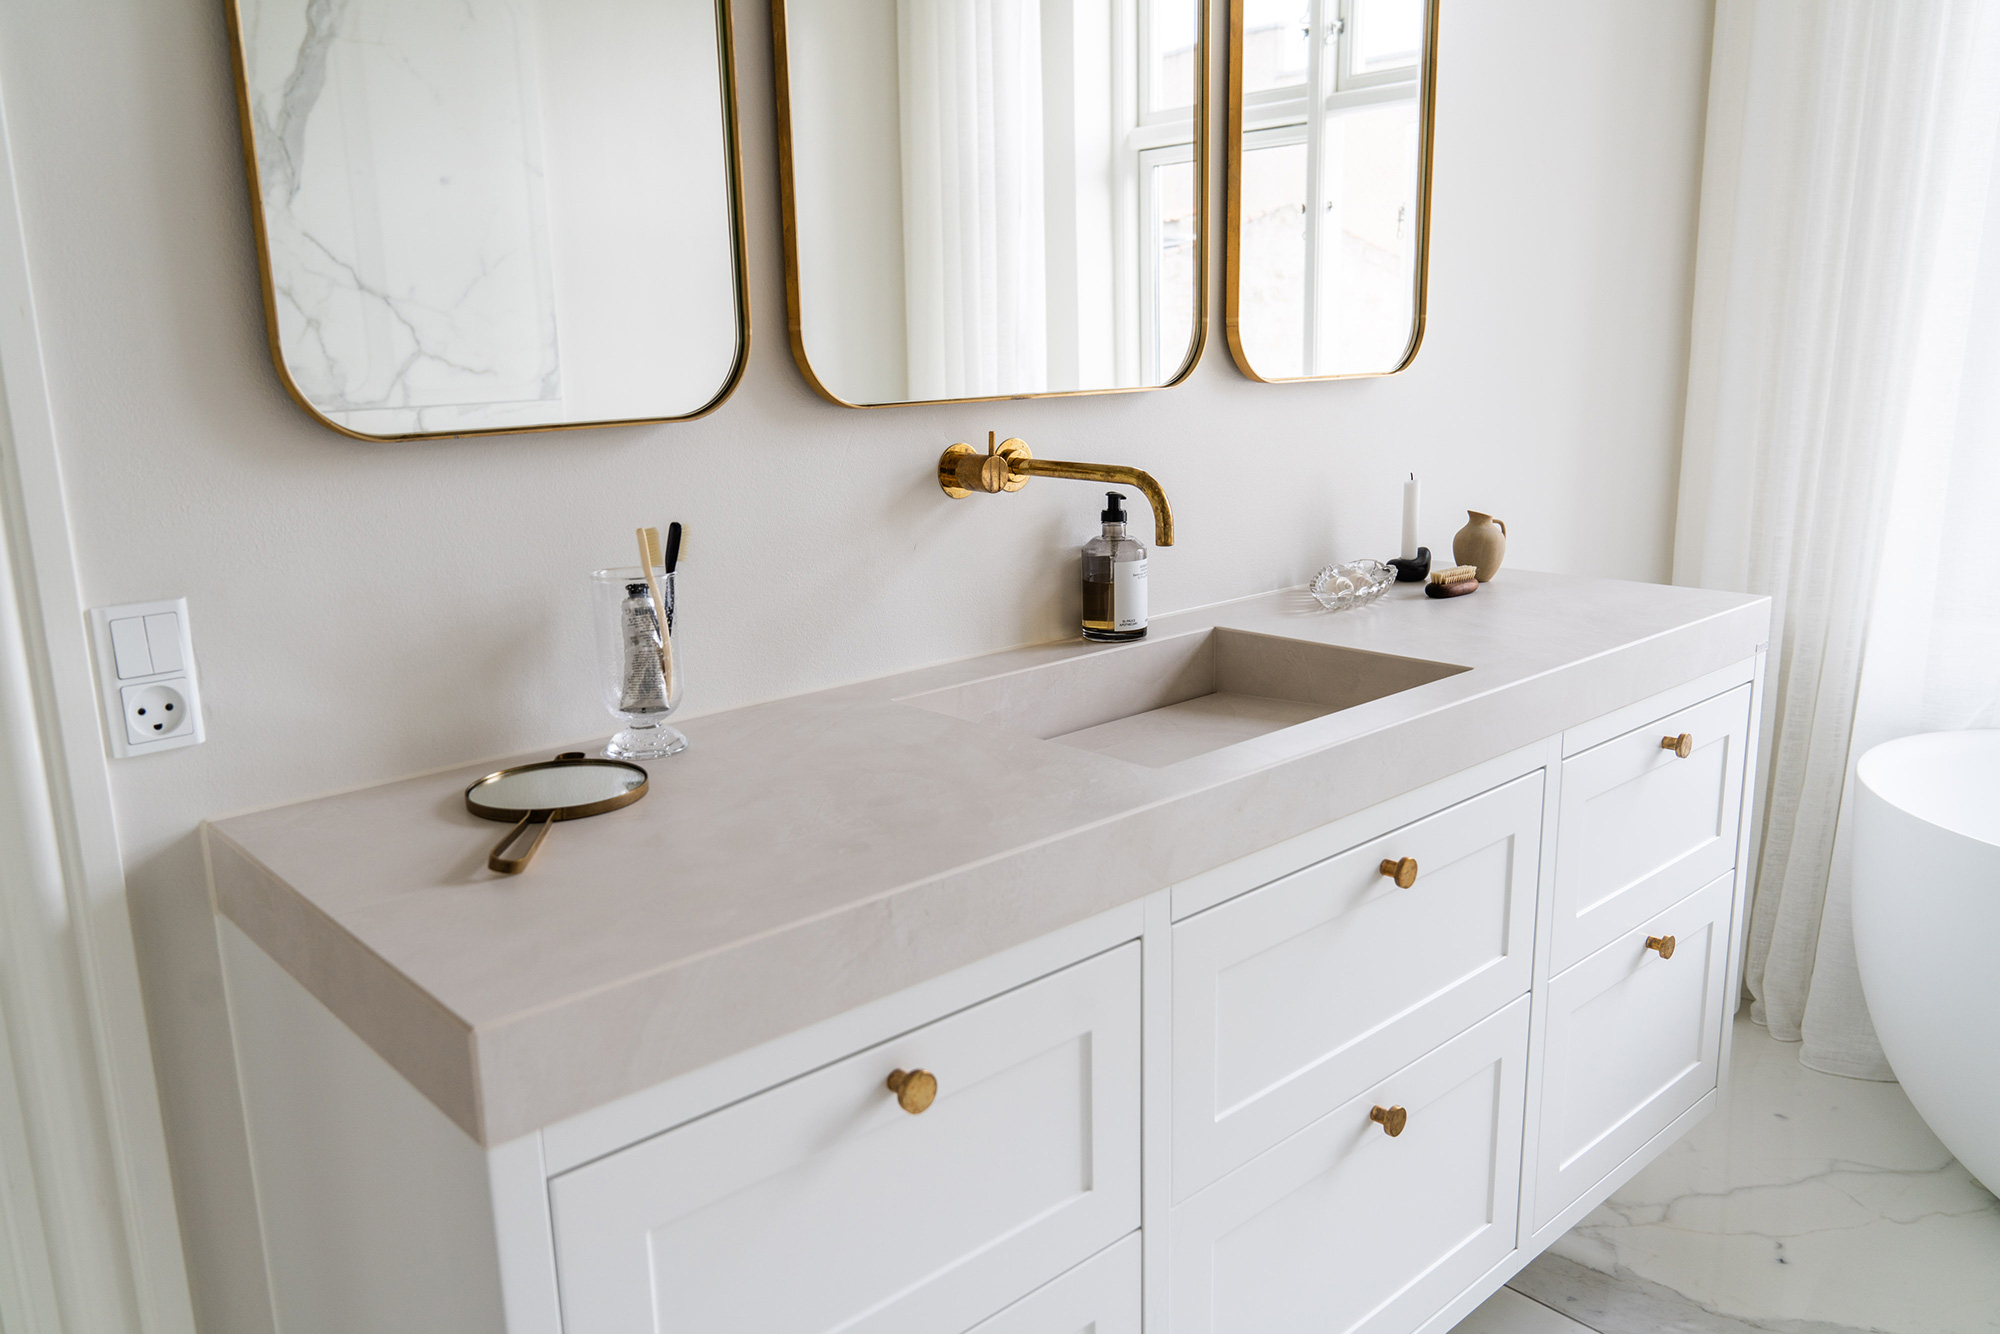 Image of Carla Sofie Molge in With Dekton Albarium as the star, Danish influencer Carla Sofie Molge’s bathroom is an ode to elegance - Cosentino